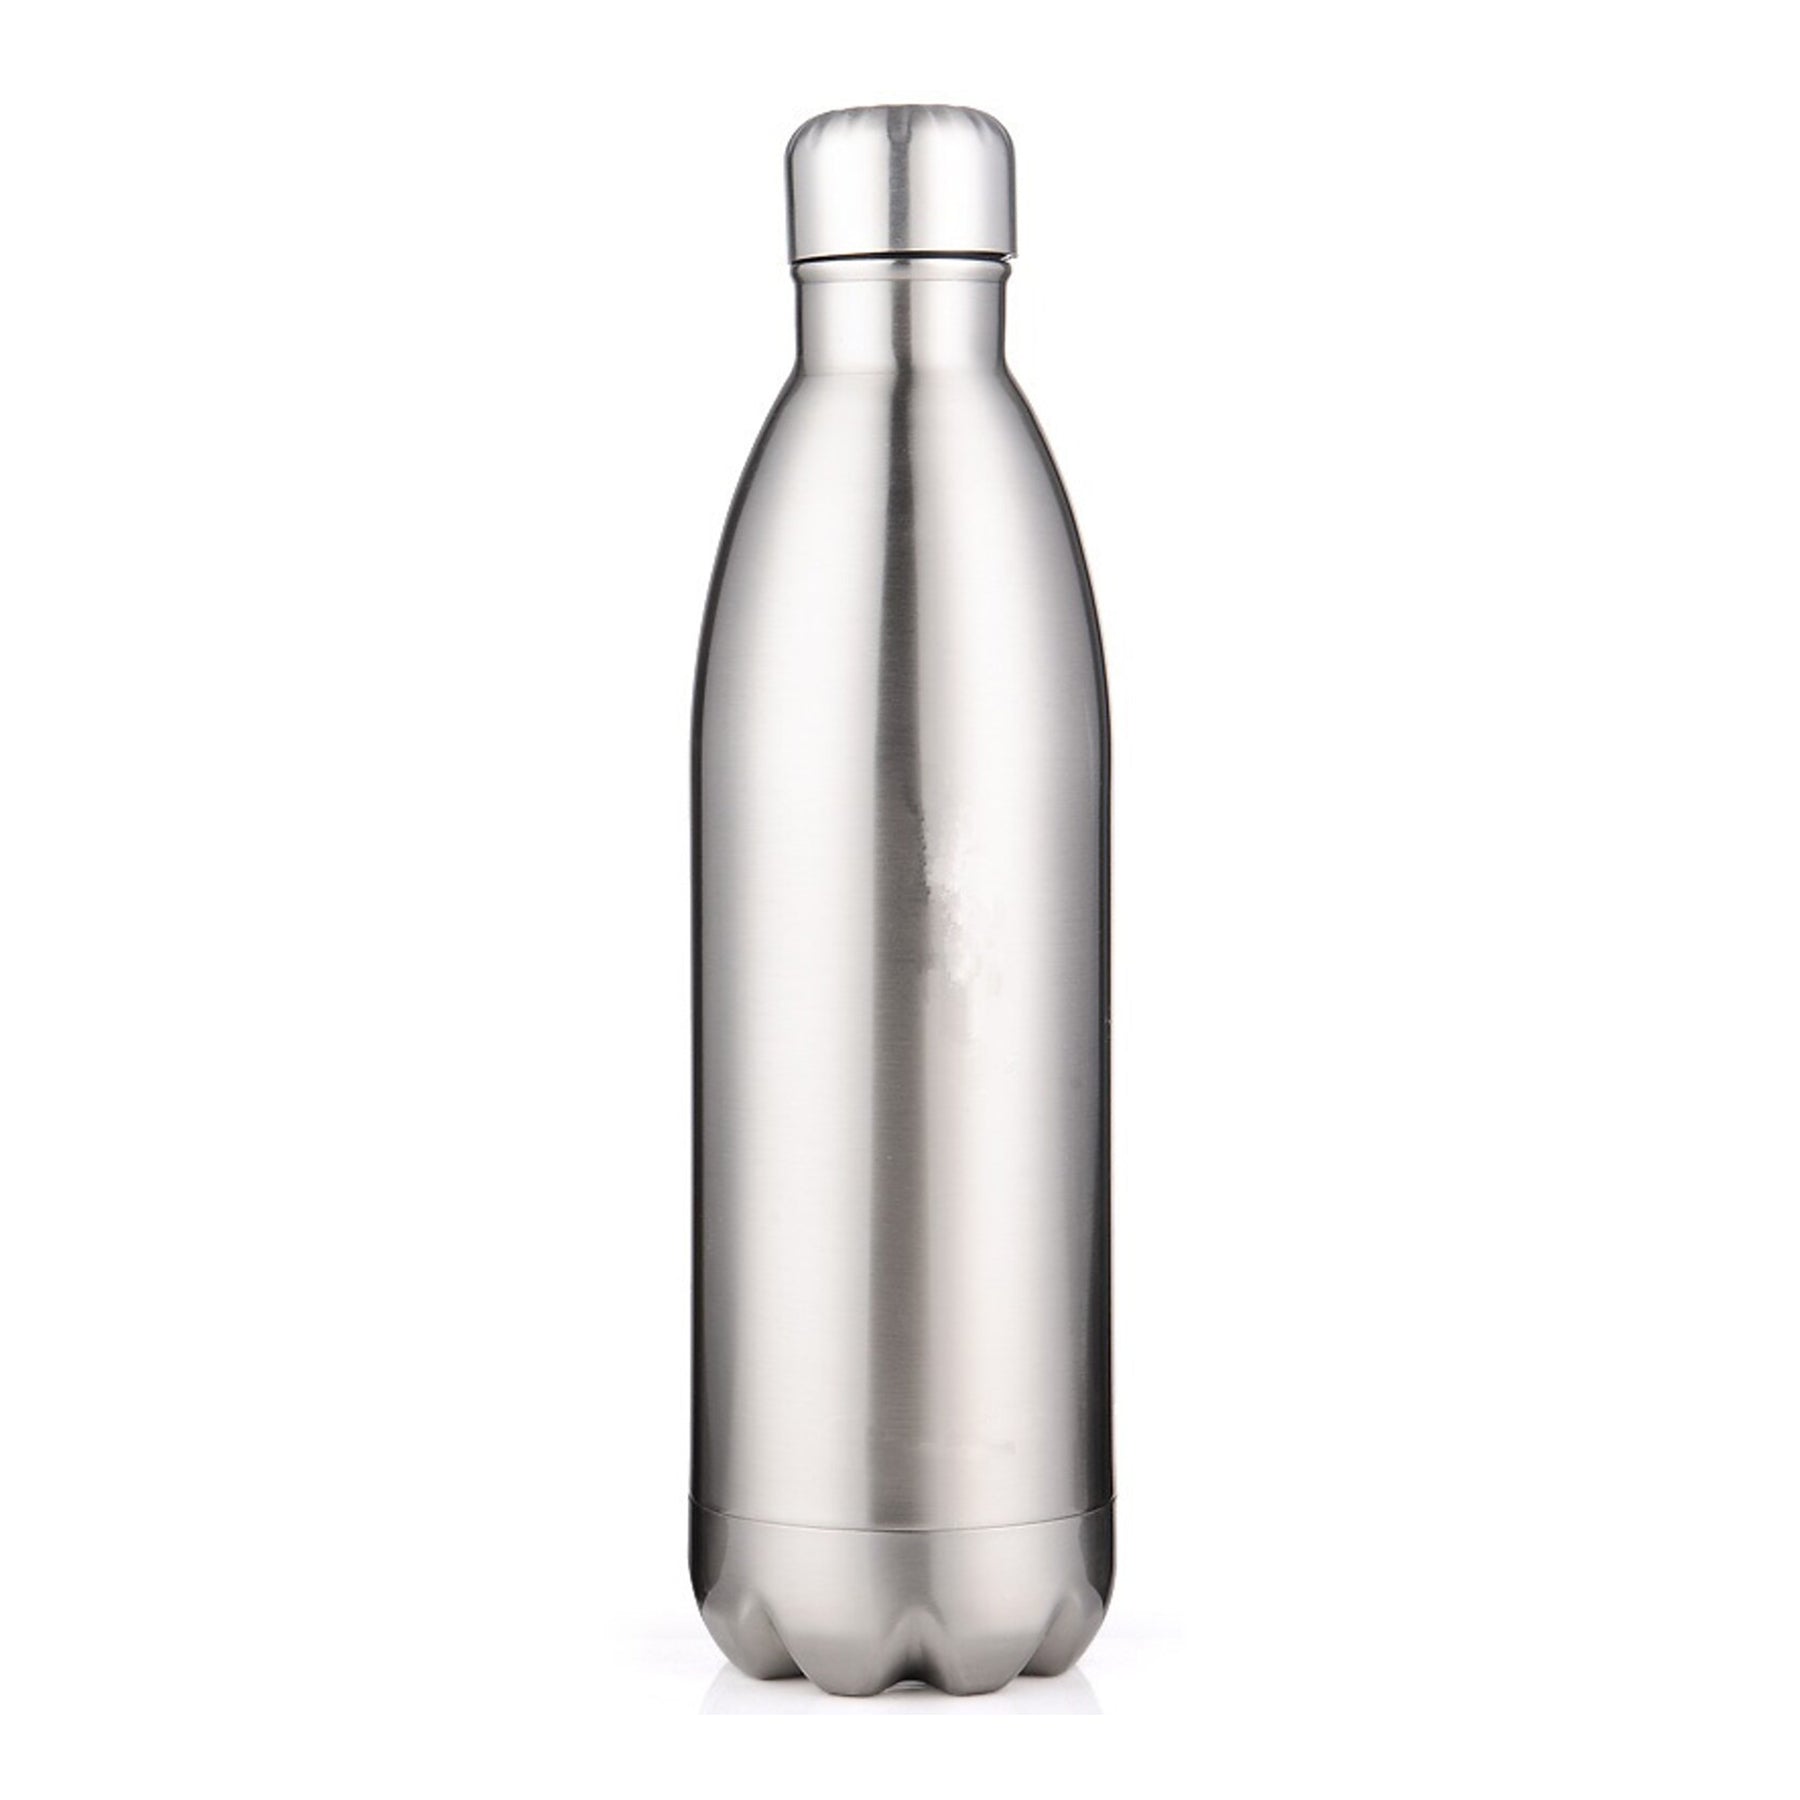 Sliver stainless steel water bottle